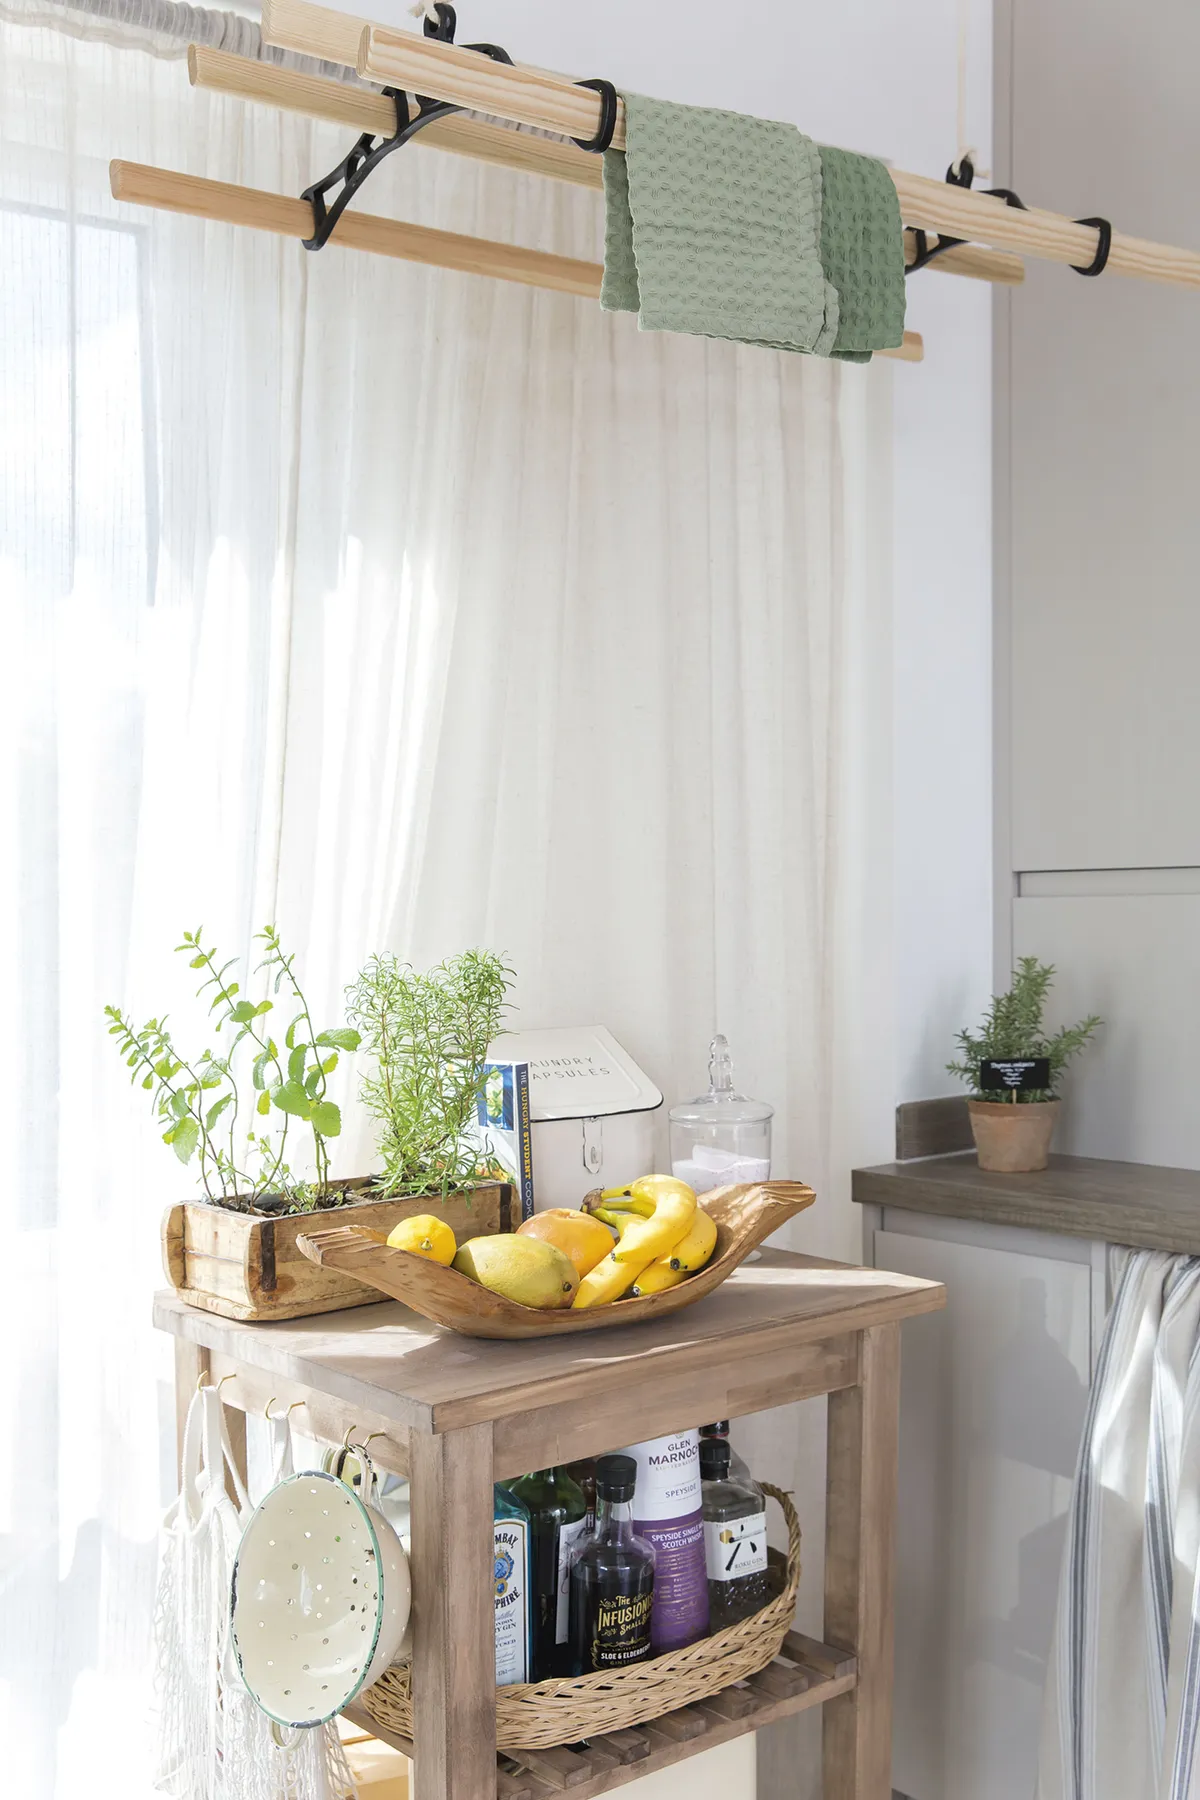 A hanging clothes dryer keeps the floor space free. The wooden kitchen trolley is on castors so can be moved around, and provides extra worktop and storage space for fruit and bar ingredients